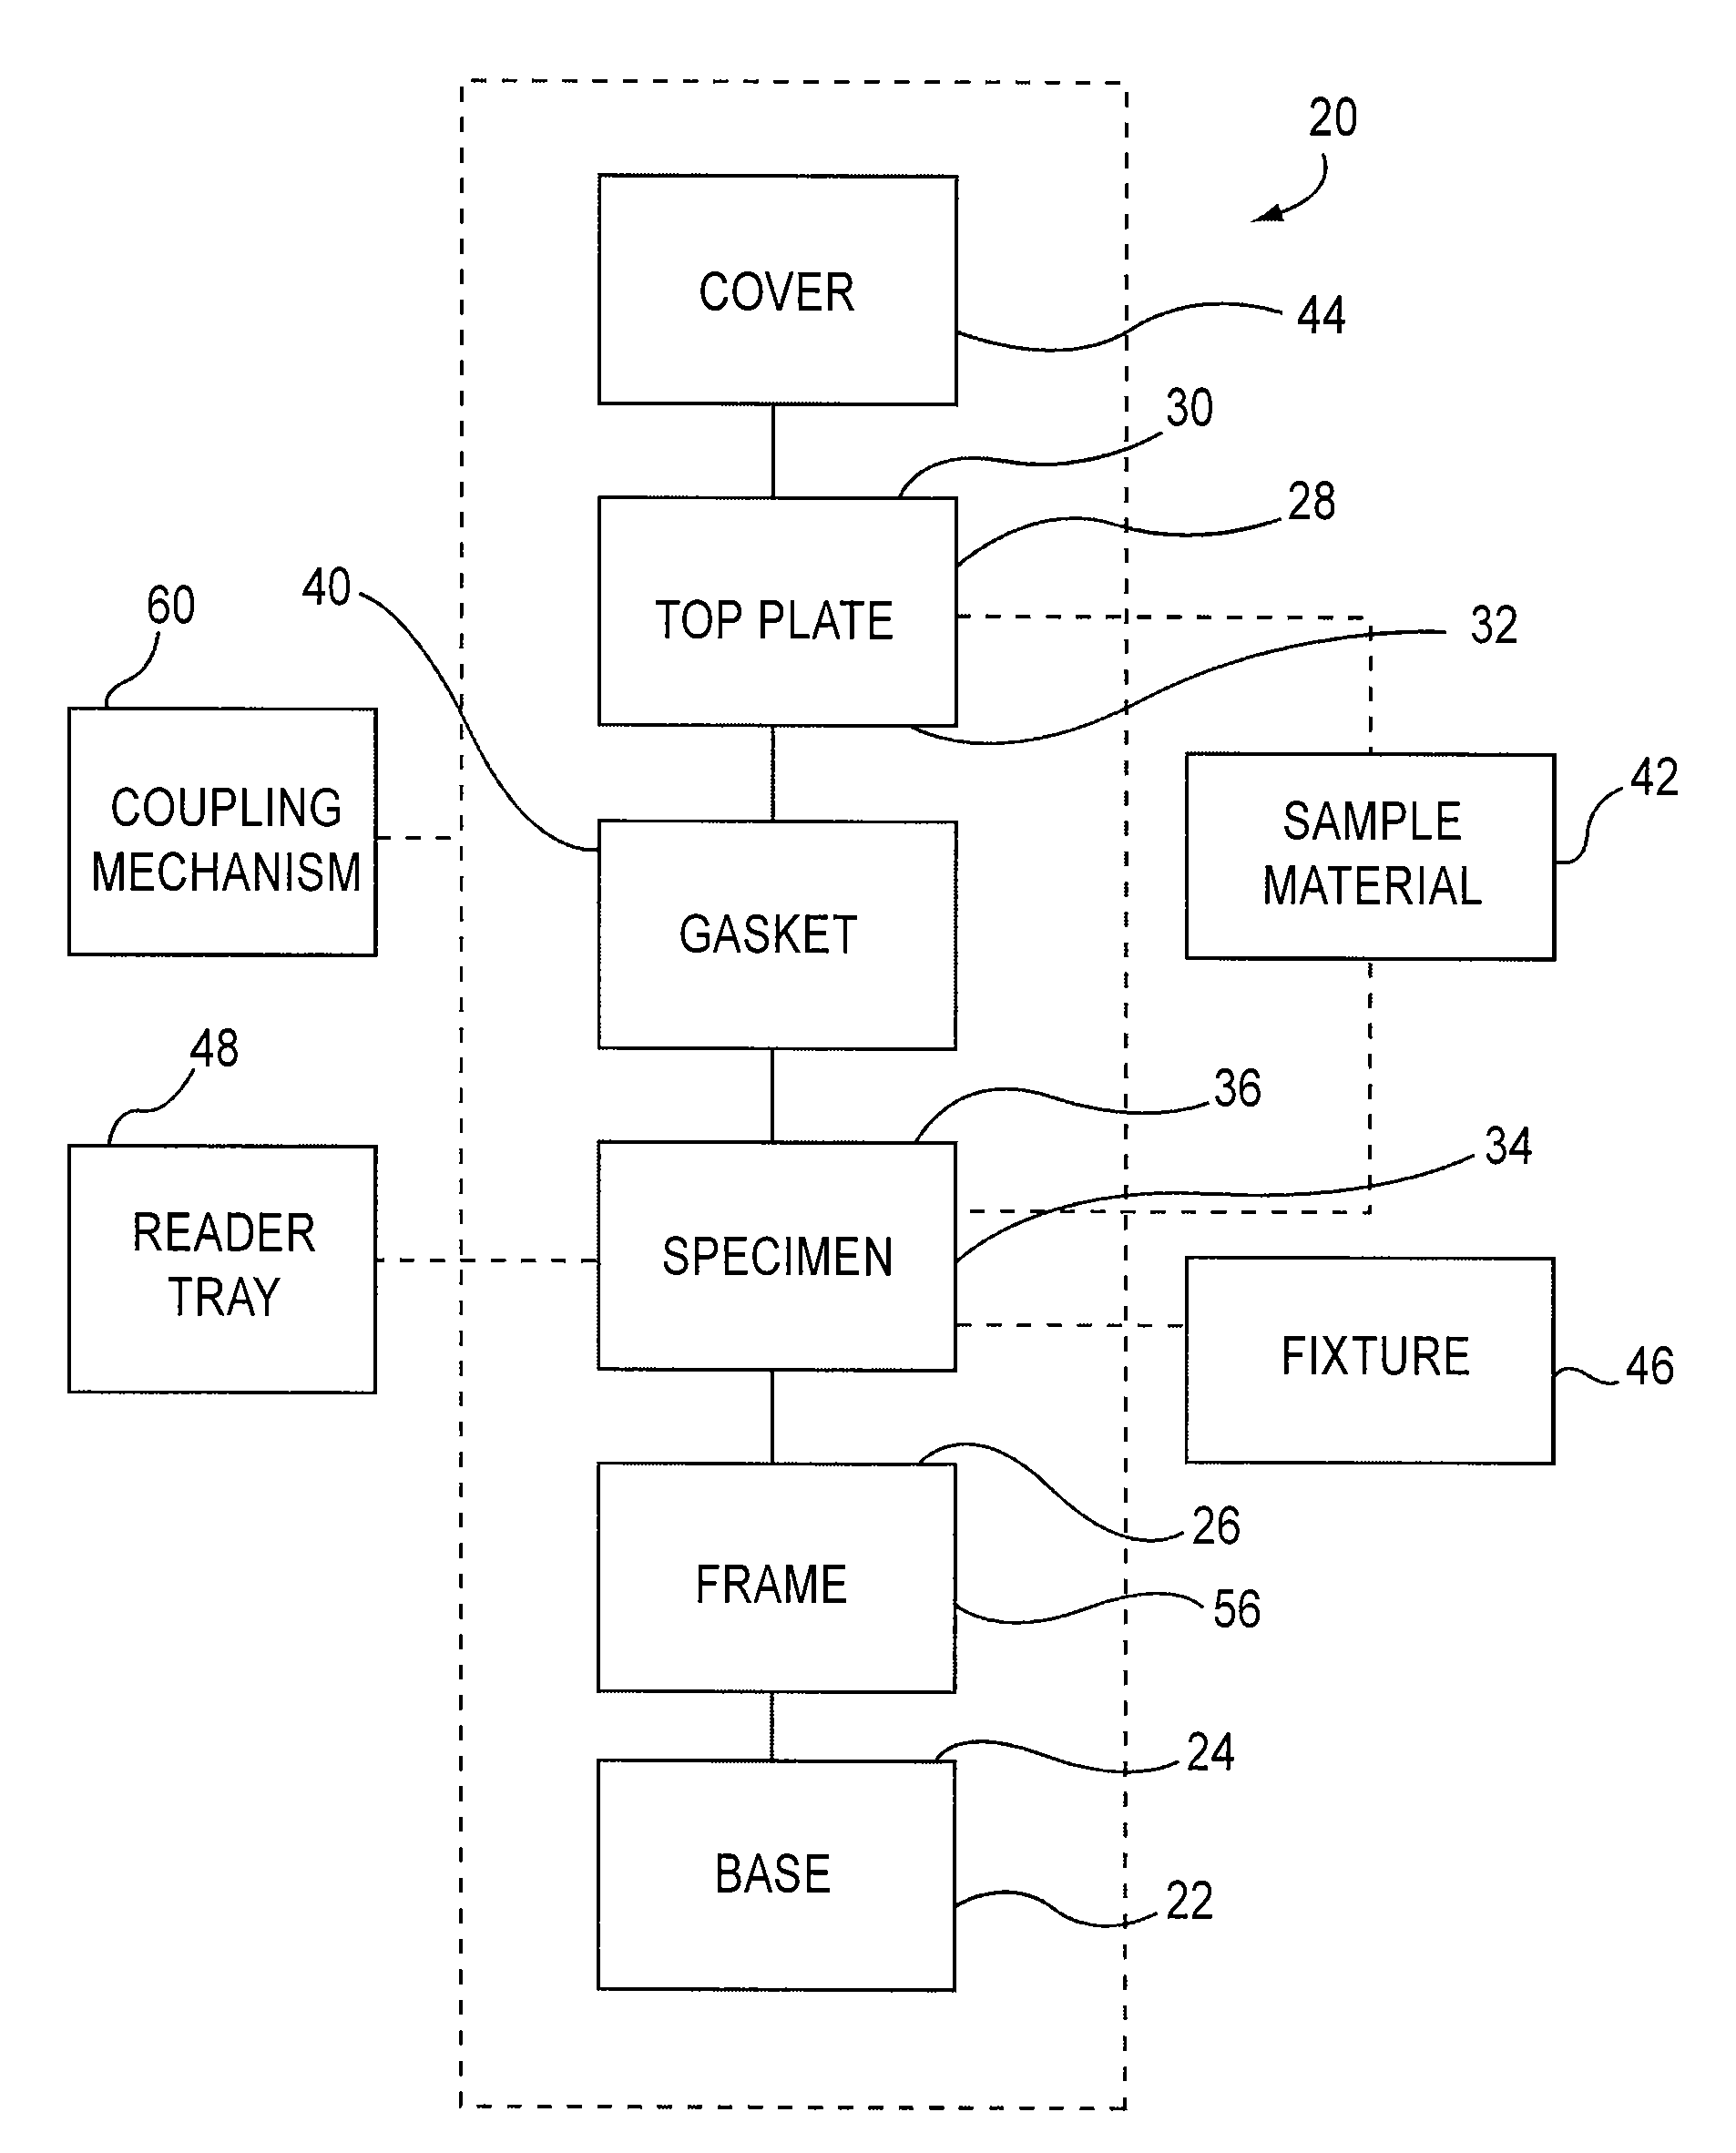 Apparatus and method of performing high-throughput cell-culture studies on biomaterials